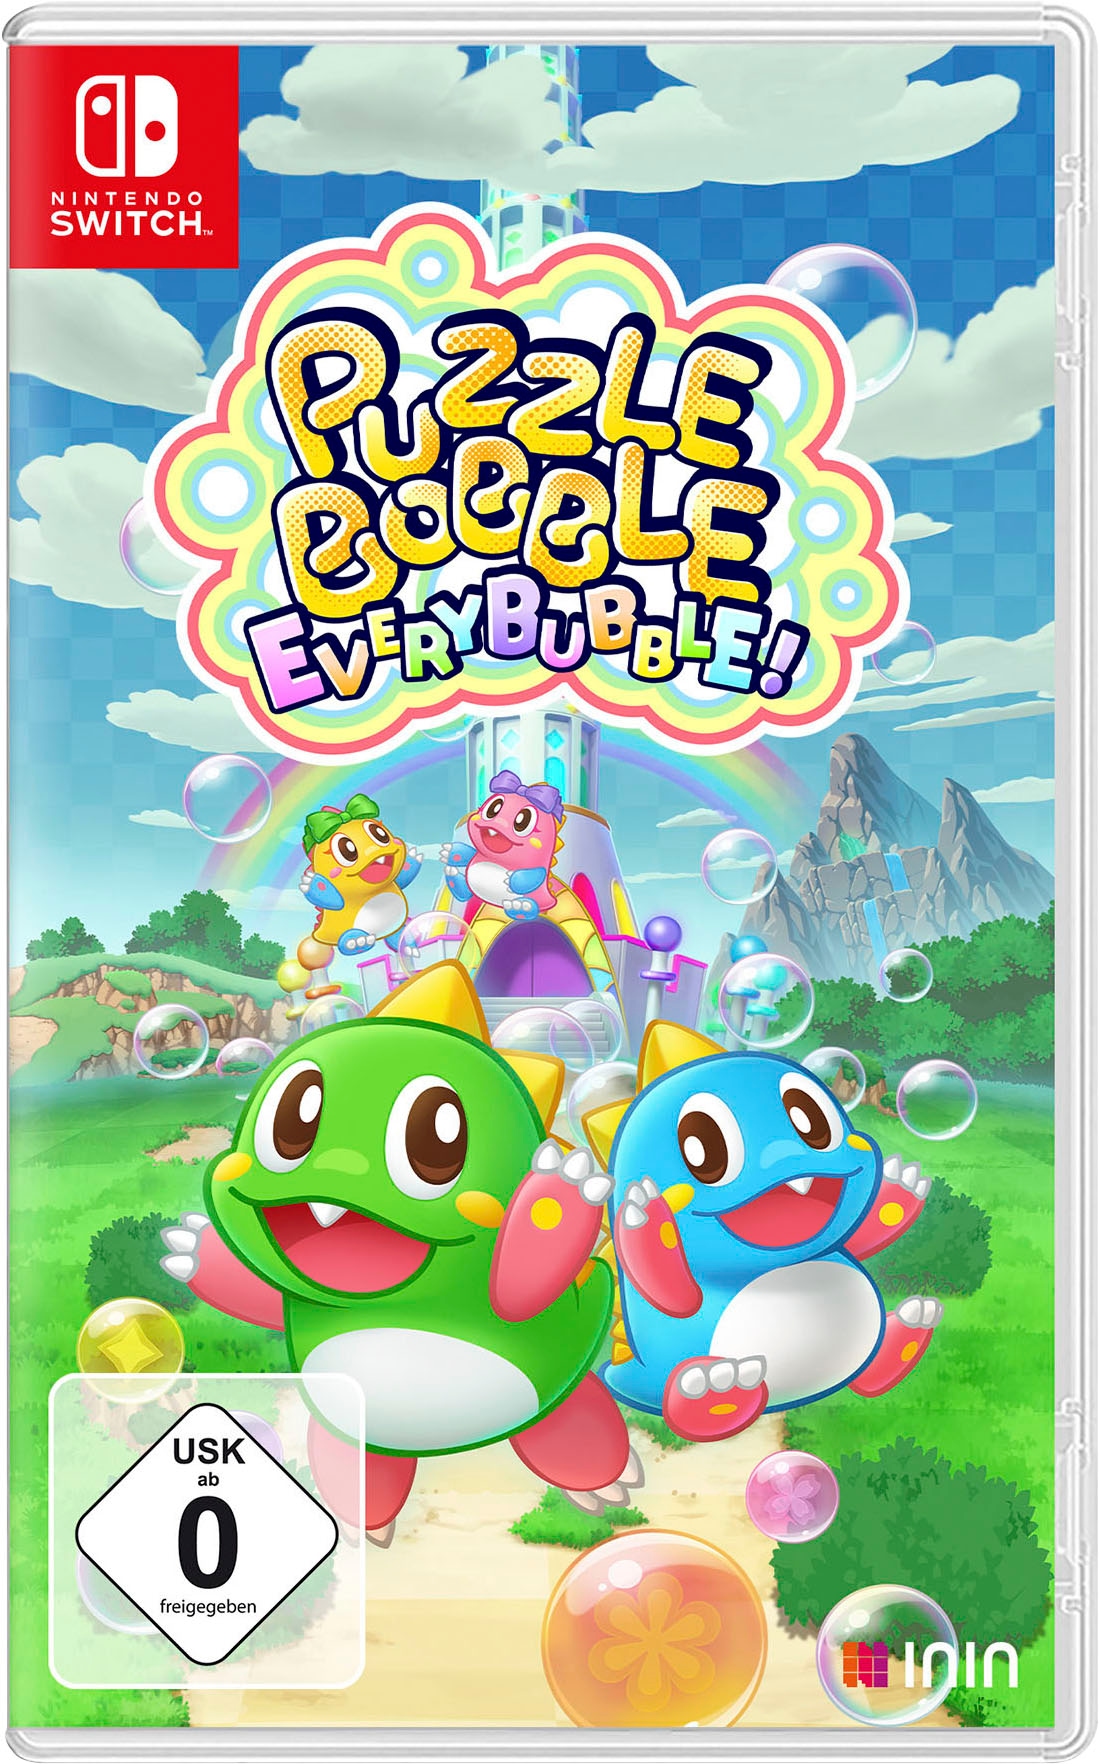 Spielesoftware »Puzzle Bobble Everybubble!«, Nintendo Switch